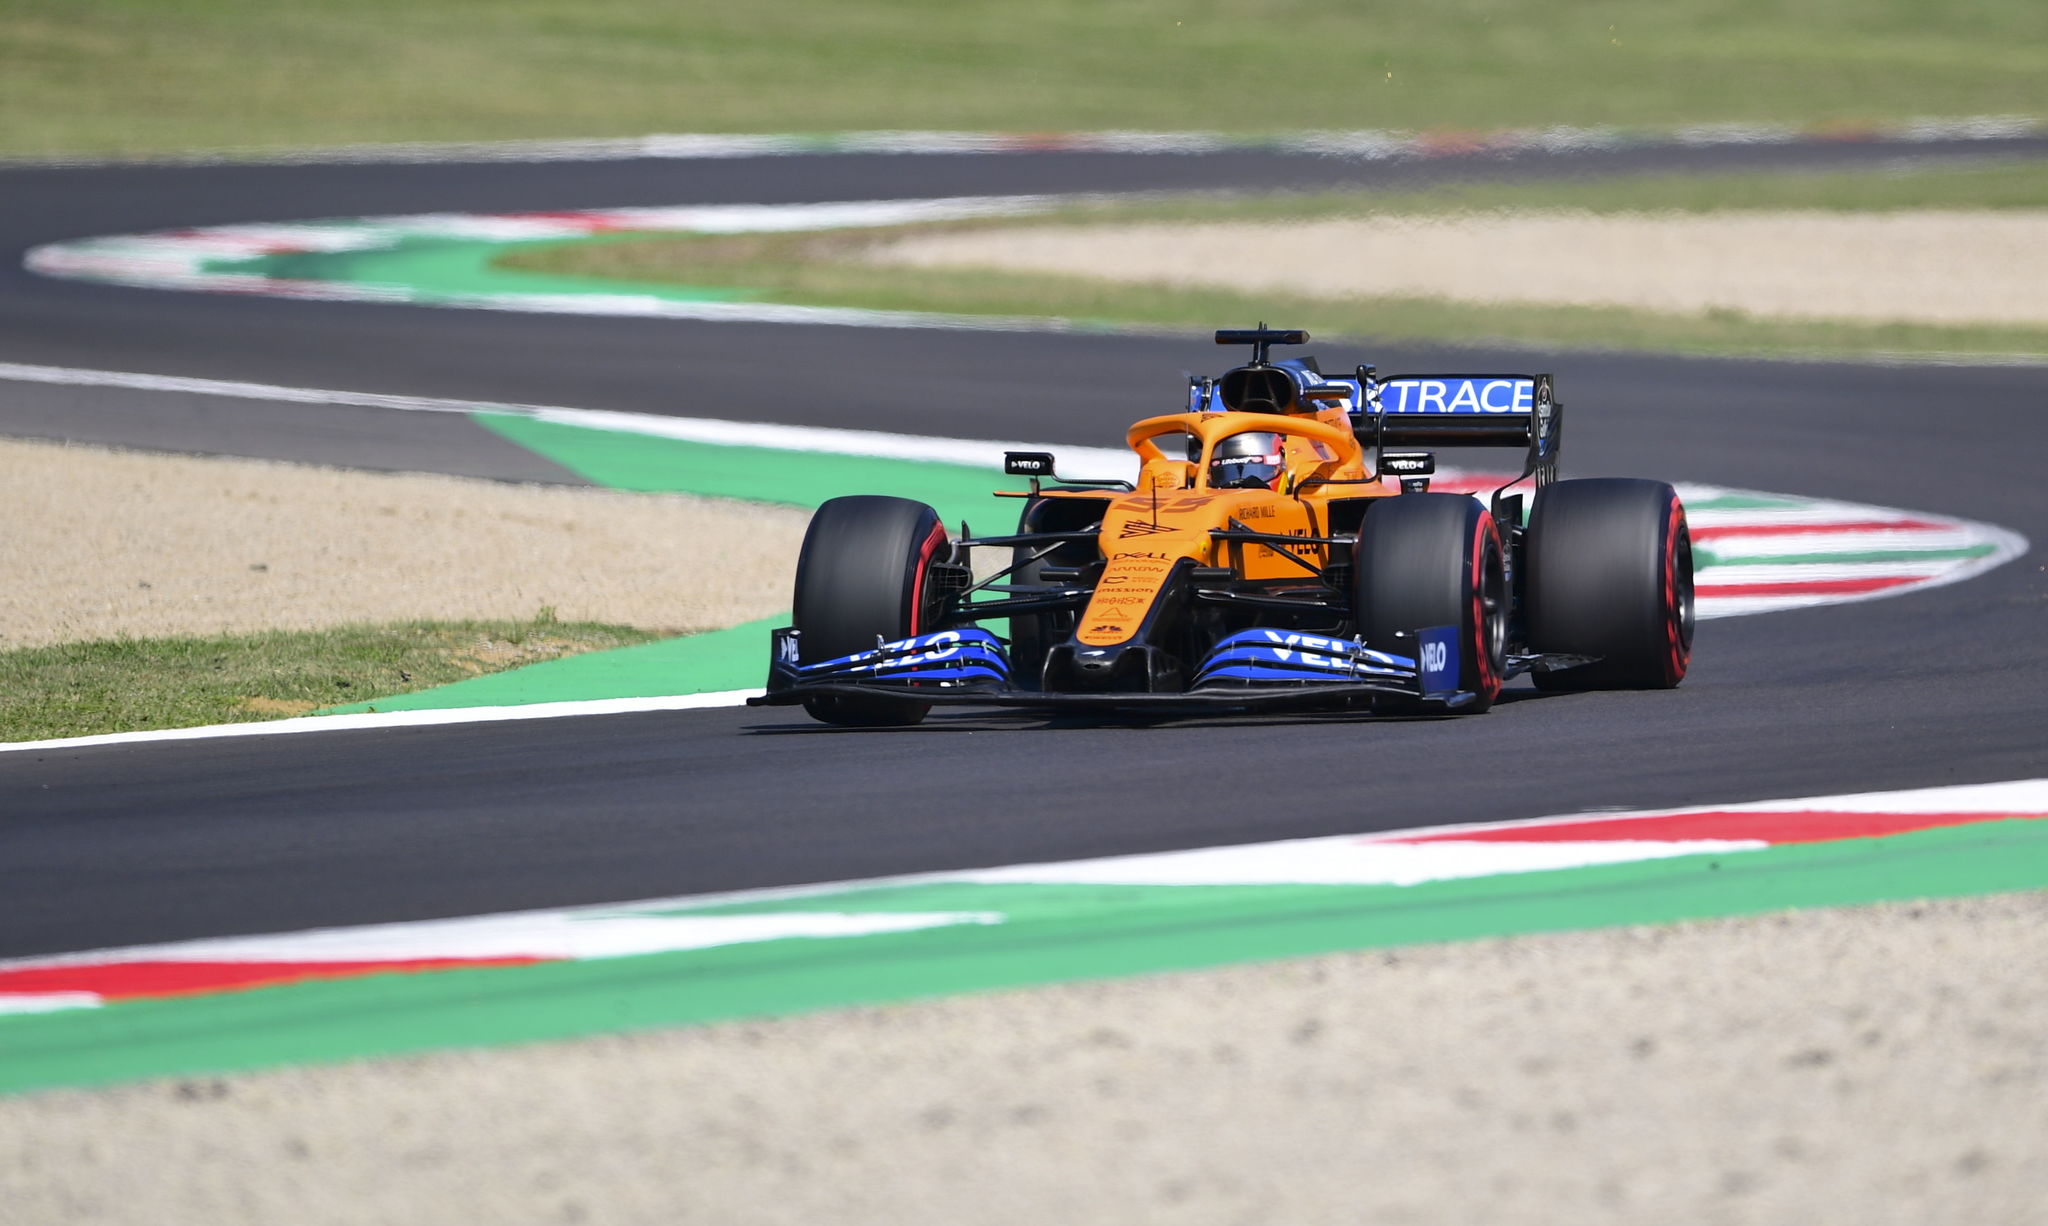 Mugello (Italy), 12/09/2020.- Spanish Formula One driver Carlos lt;HIT gt;Sainz lt;/HIT gt; of McLaren in action during the third practice session of the Formula One Grand Prix of Tuscany at the race track in Mugello, Italy 12 September 2020. The 2020 Formula One Grand Prix of Tuscany will take place on 13 September 2020. (Frmula Uno, Italia) EFE/EPA/Claudio Giovannini / Pool